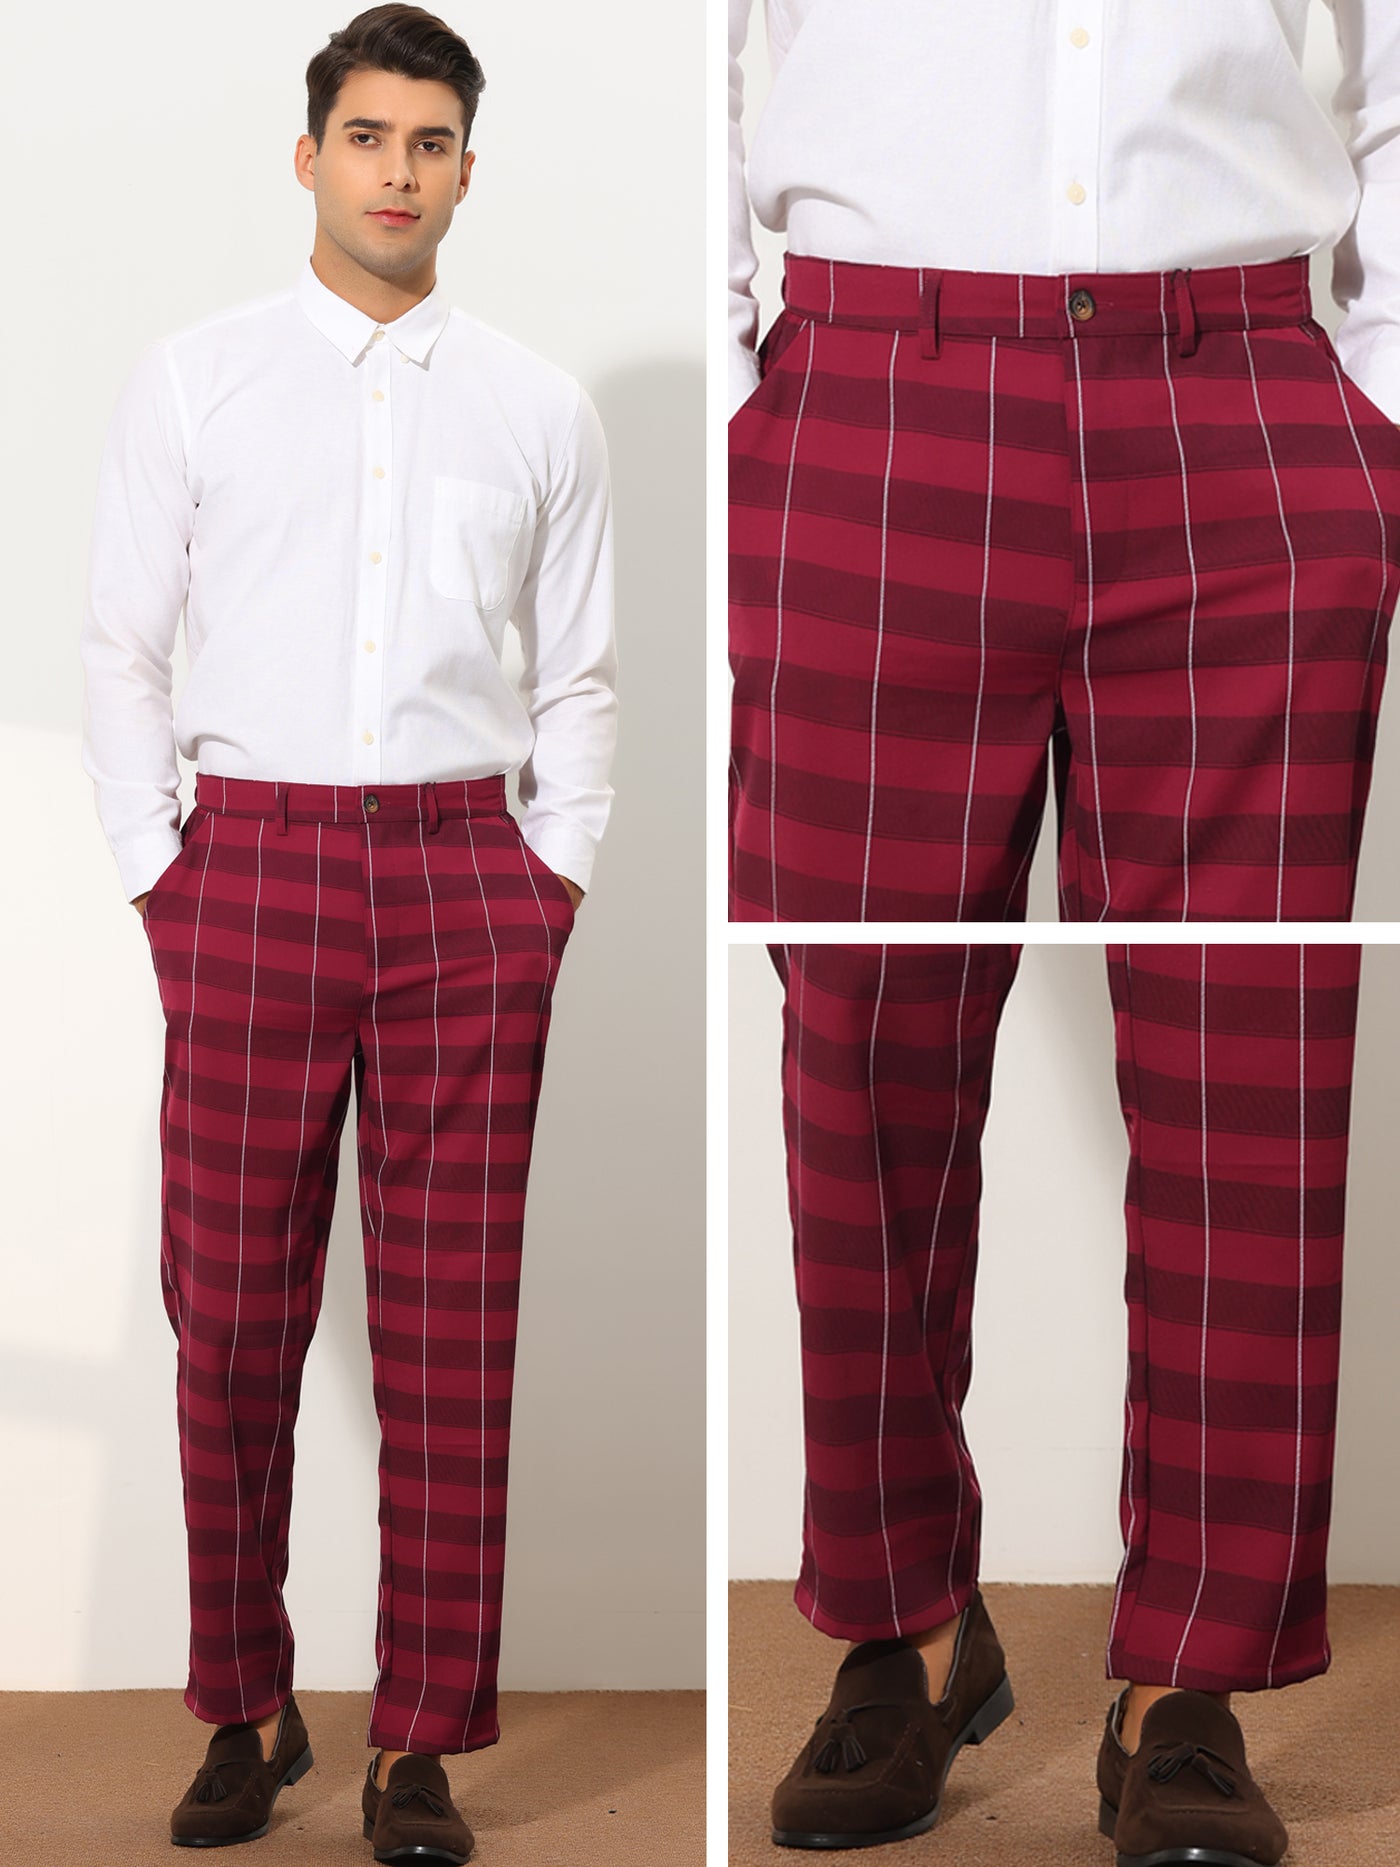 Bublédon Men's Plaid Casual Slim Fit Lightweight Tapered Checked Pants